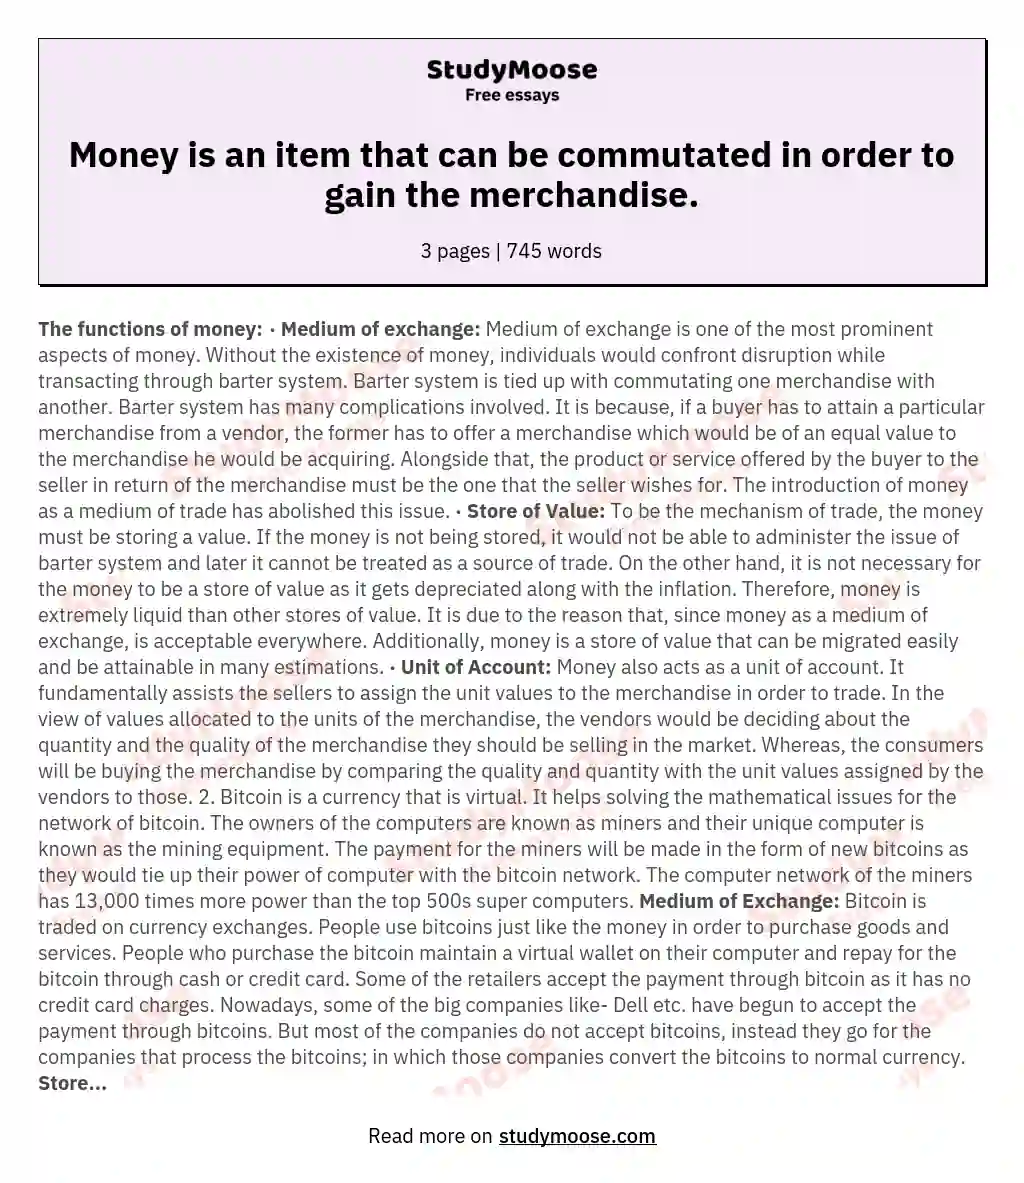 Money is an item that can be commutated in order to gain the merchandise. essay